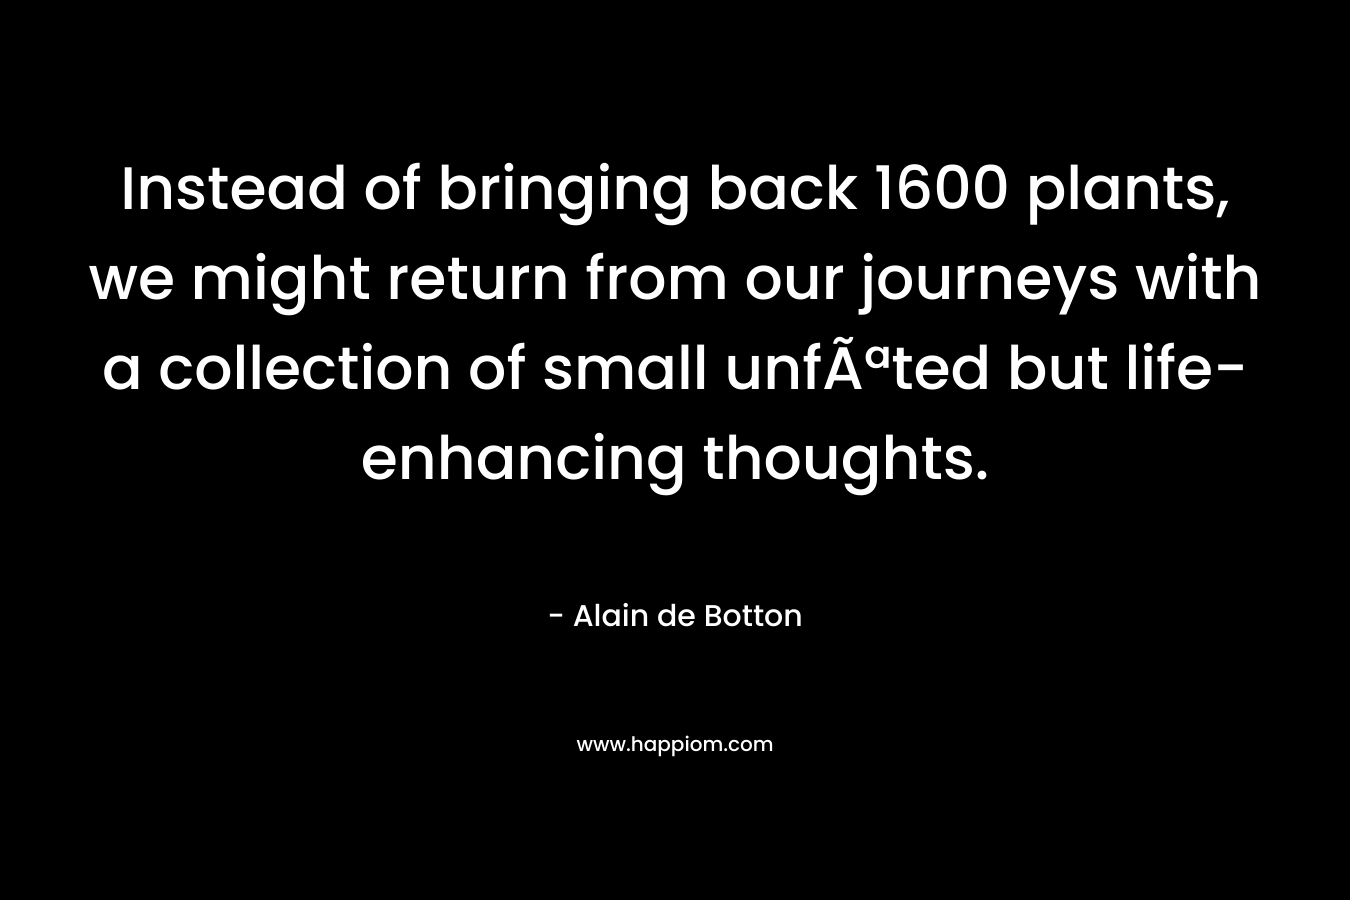 Instead of bringing back 1600 plants, we might return from our journeys with a collection of small unfÃªted but life-enhancing thoughts. – Alain de Botton